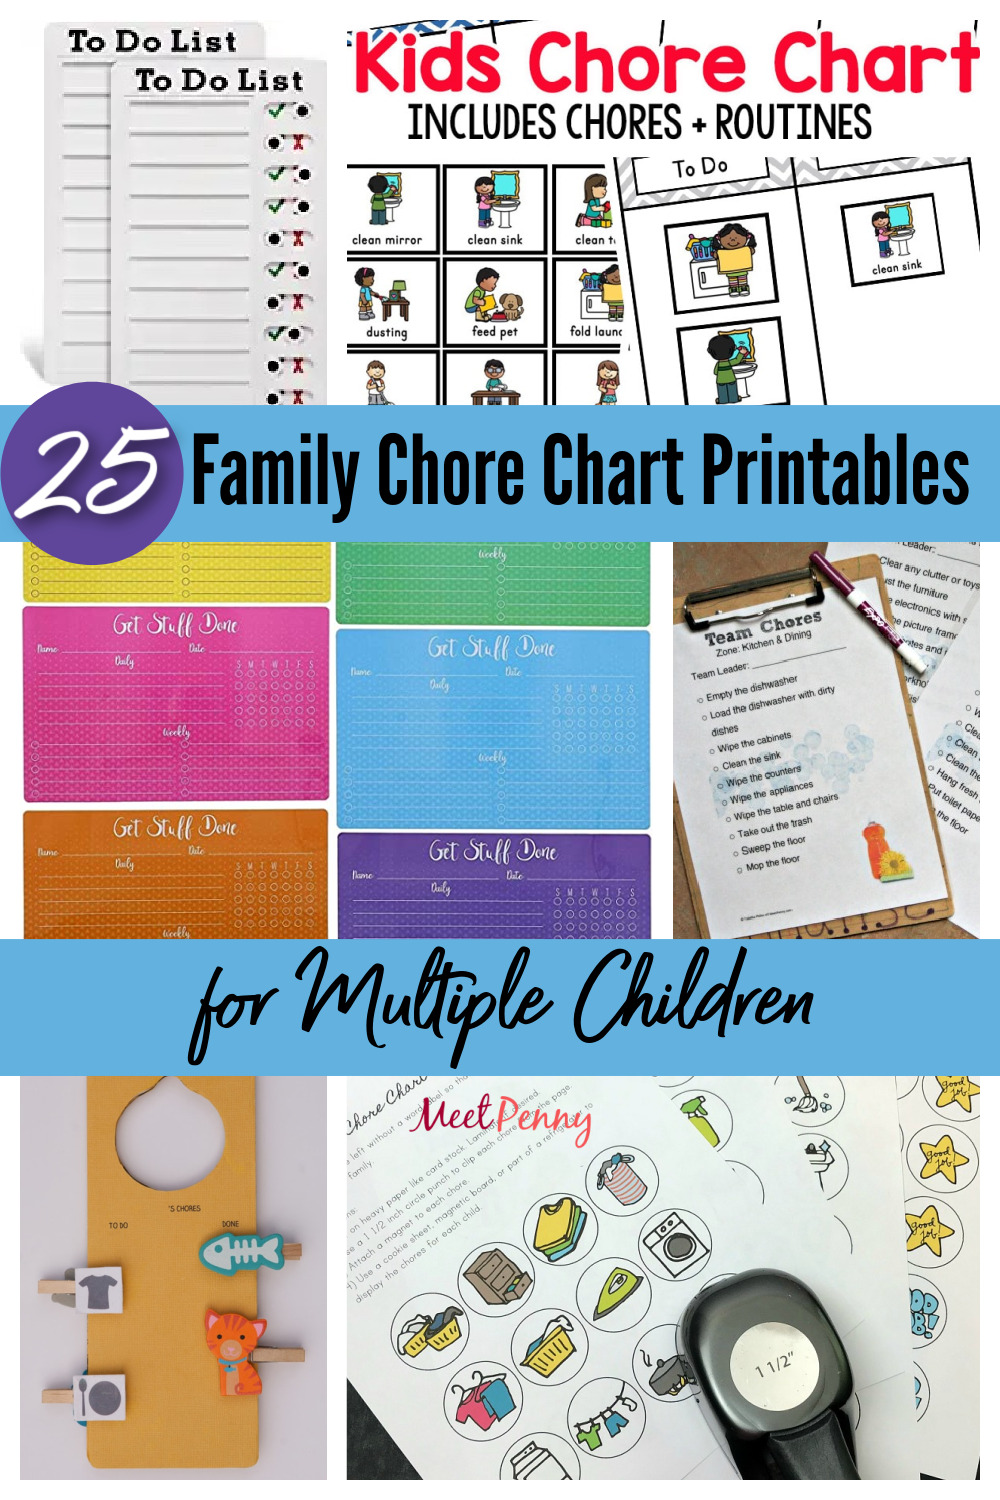 There are many family chore charts for multiple children available so you can find a chore chart perfect for your situation.